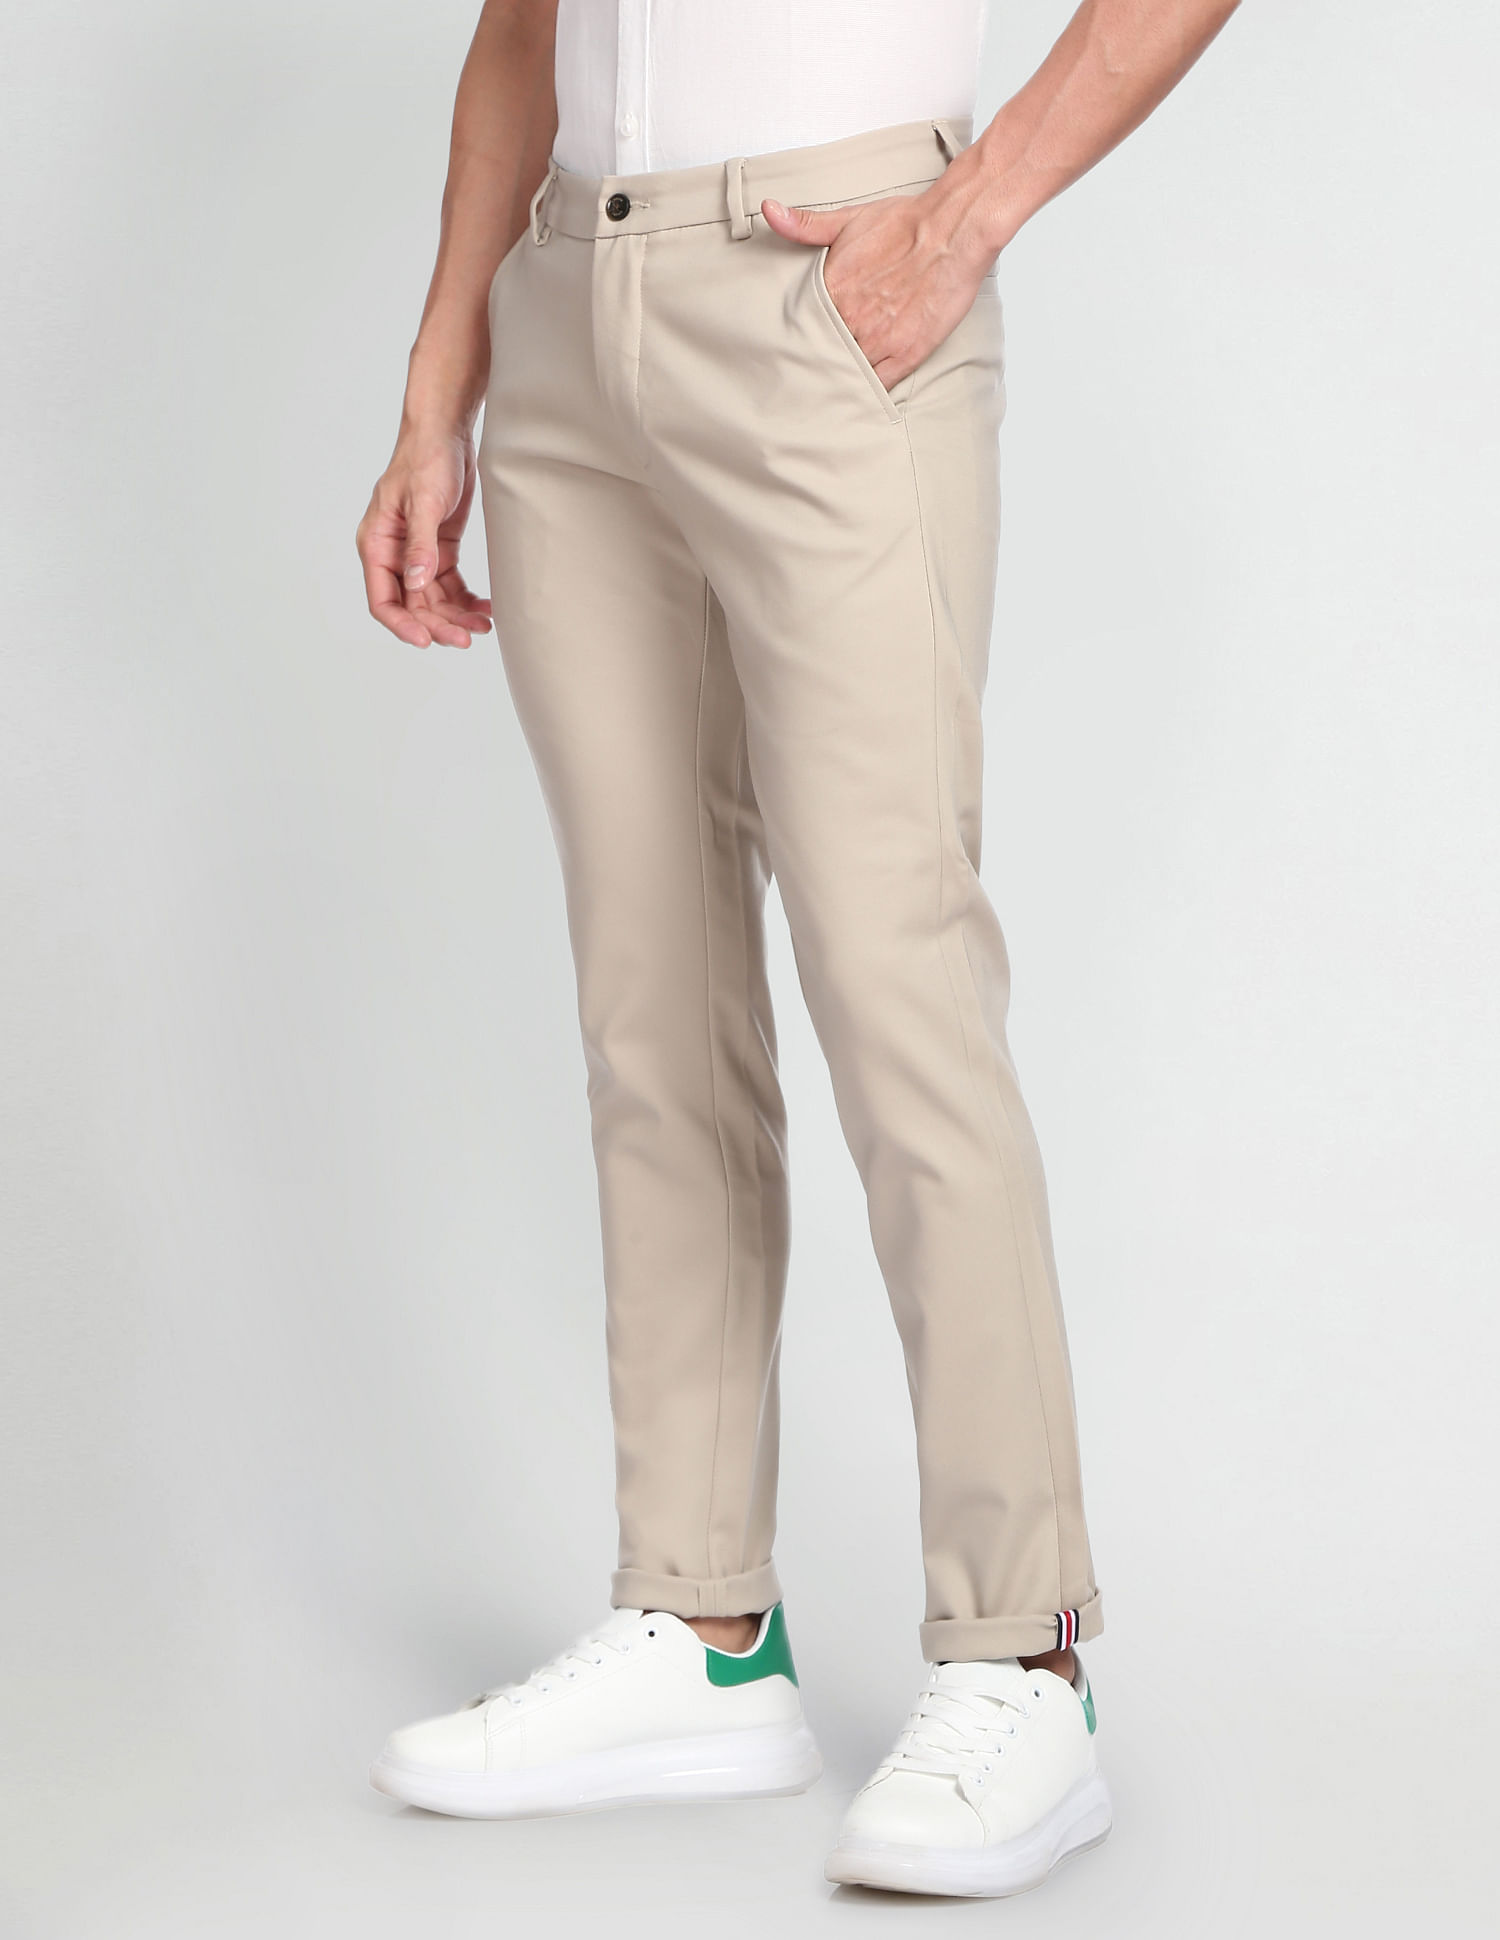 Buy Arrow Tapered Fit Autoflex Formal Trousers - NNNOW.com